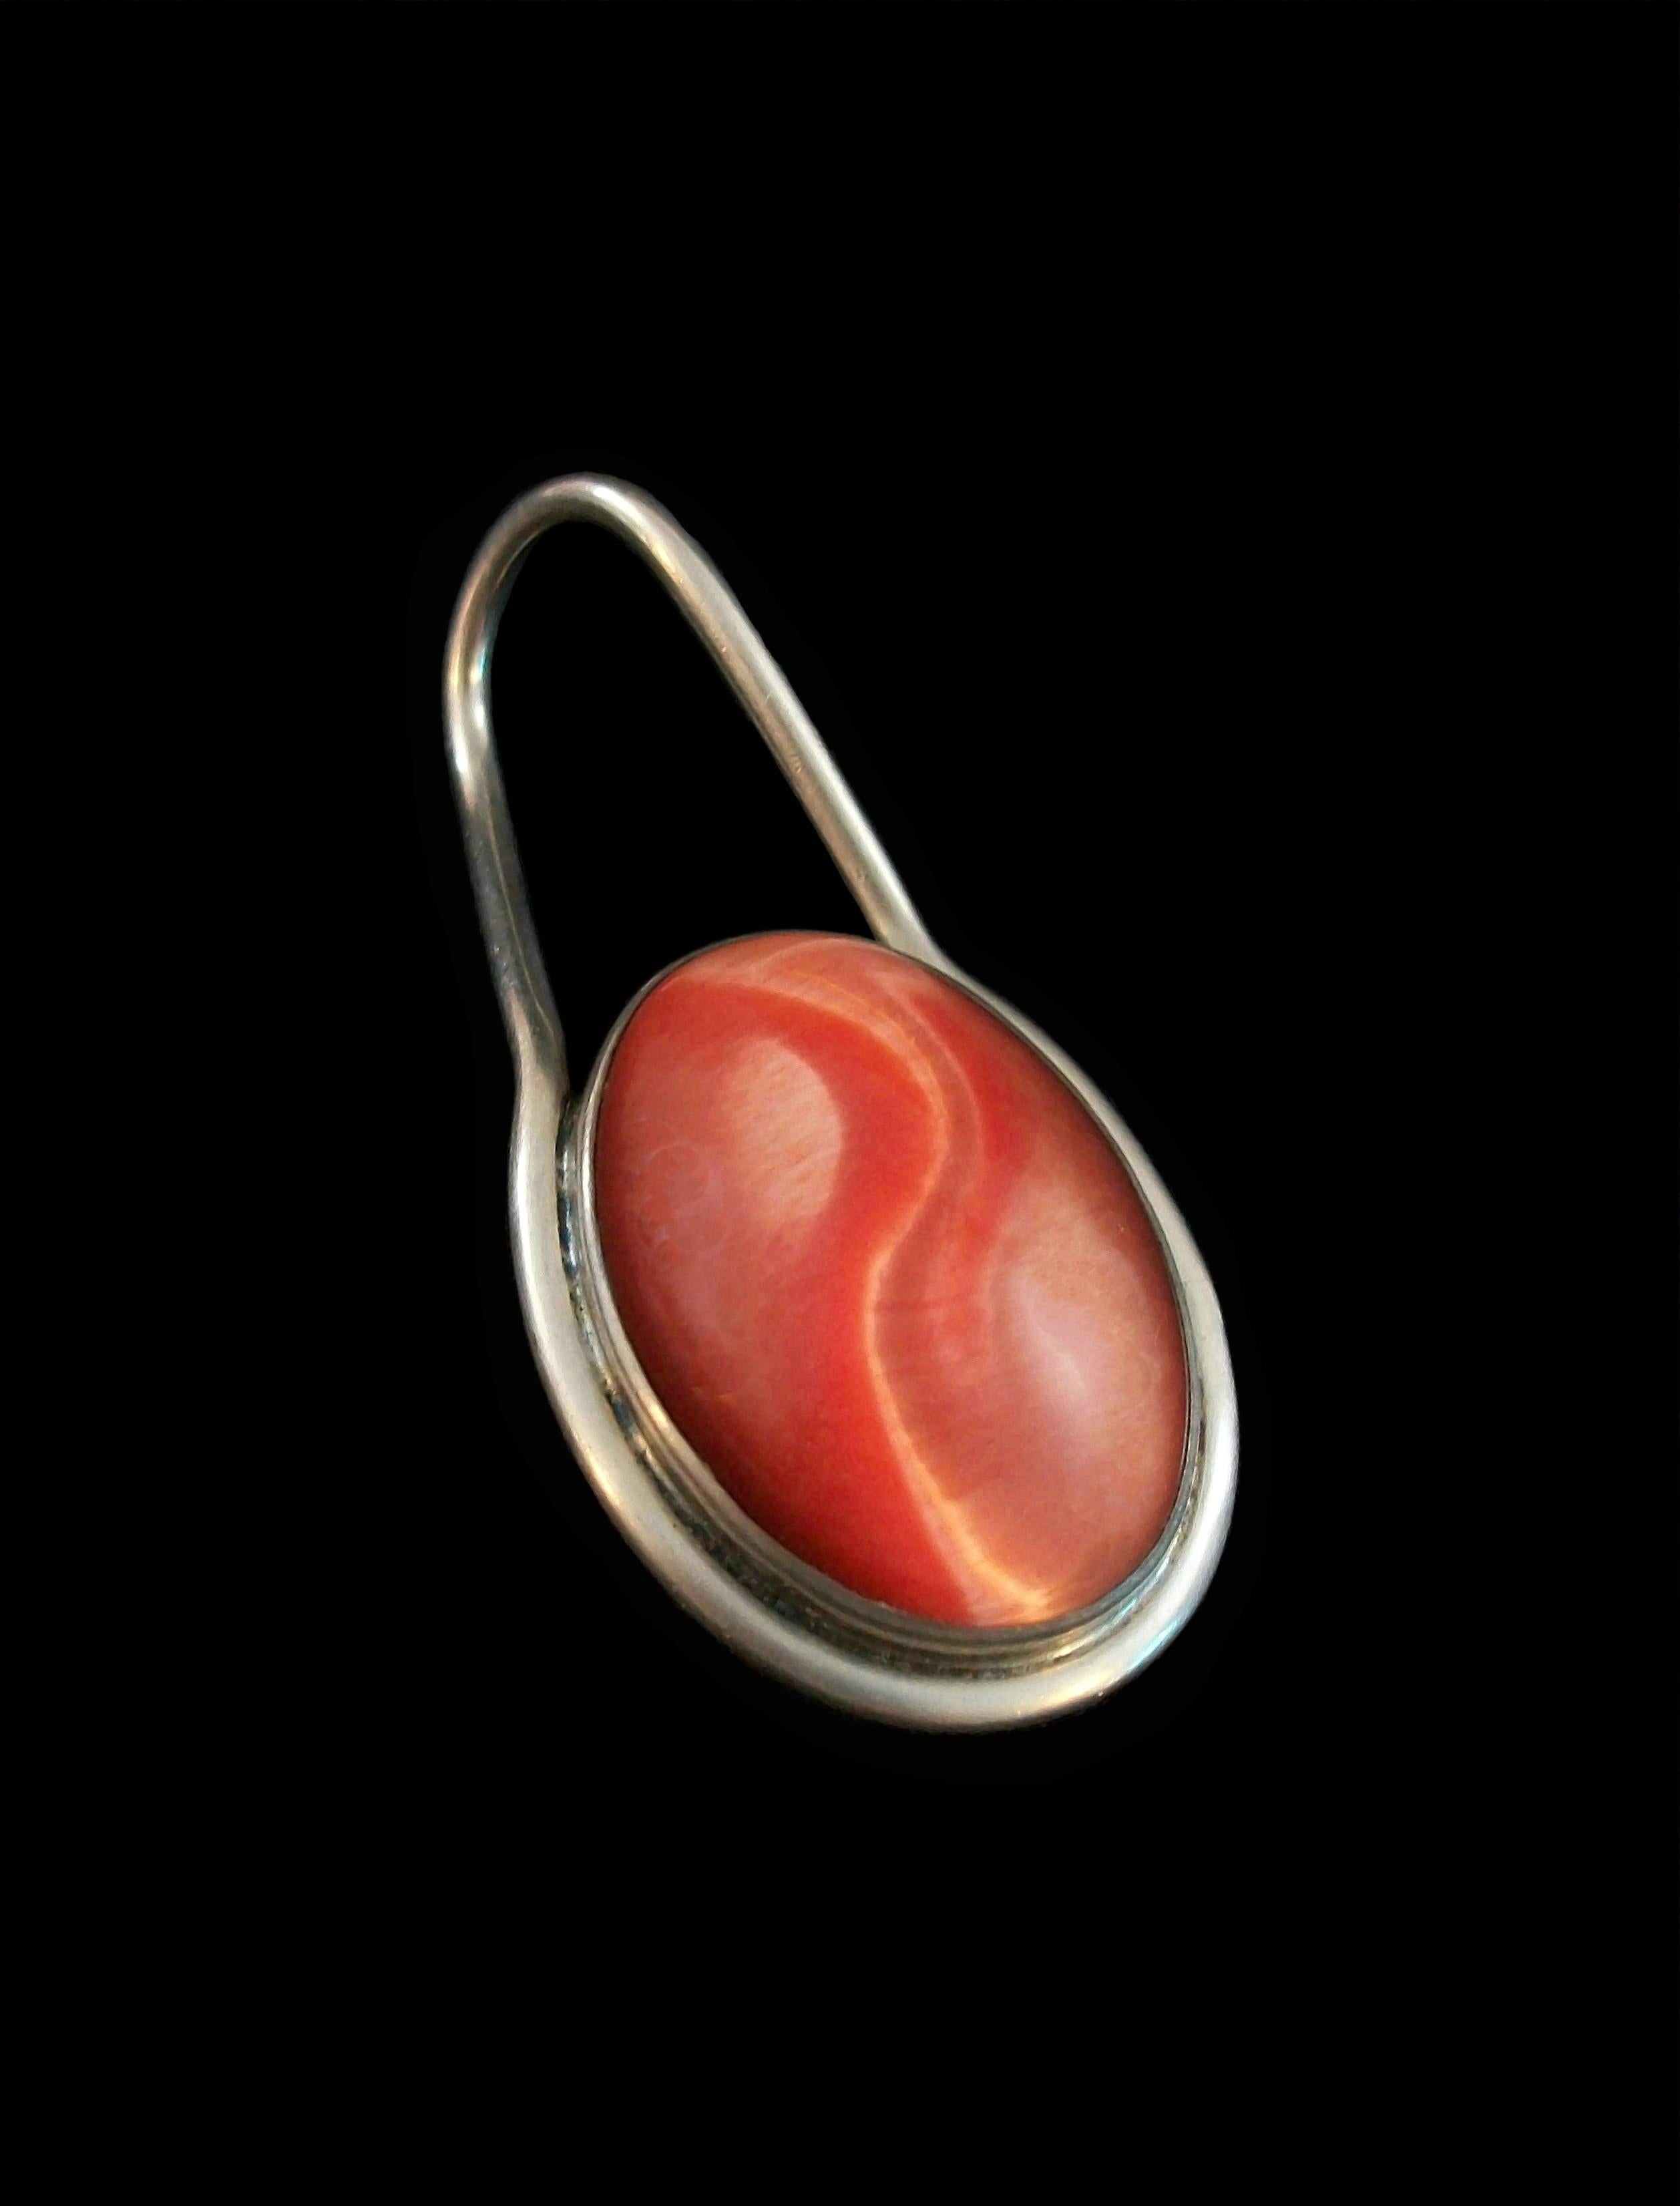 Modernist orange swirl glass and sterling silver unisex pendant - featuring a large polished bezel set cabochon - large bale - no chain - signed on the back TB-95 - Mexico (Taxco) - late 20th century.

Excellent vintage condition - all original -